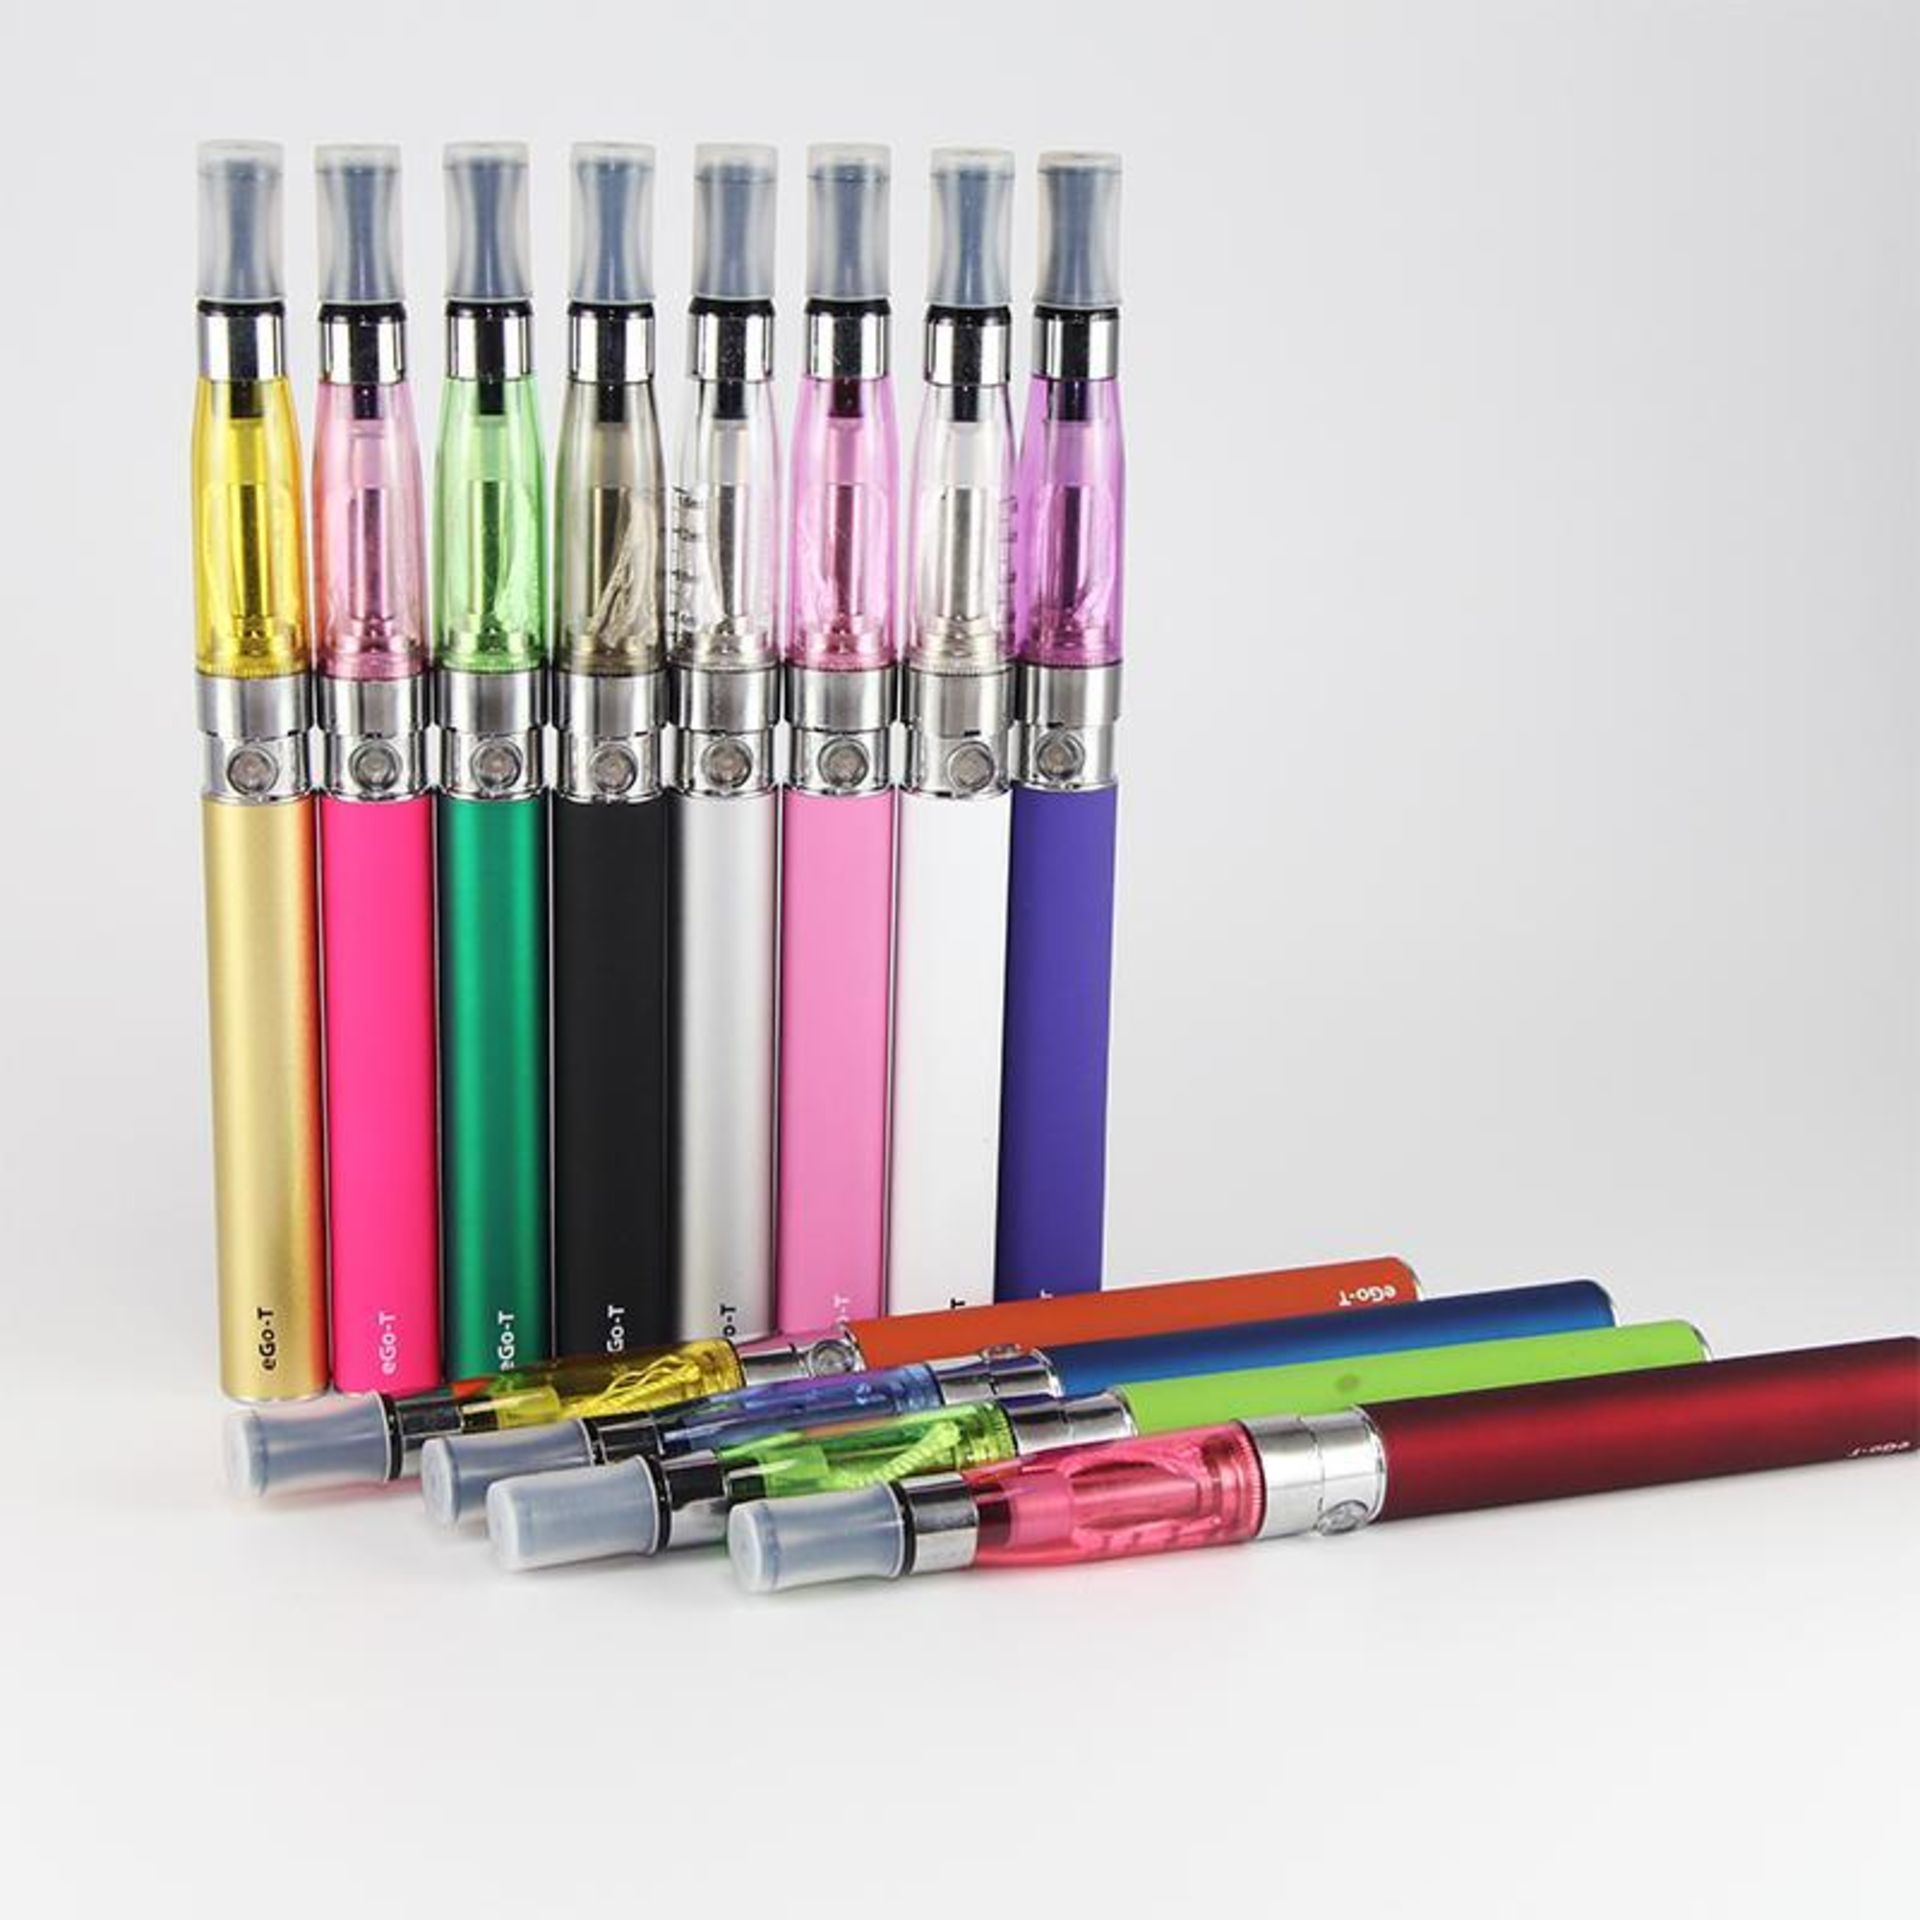 Grade A Refillable Electronic Cigarette Kit With Battery And USB Charger (Colours May Vary) - Image 2 of 2